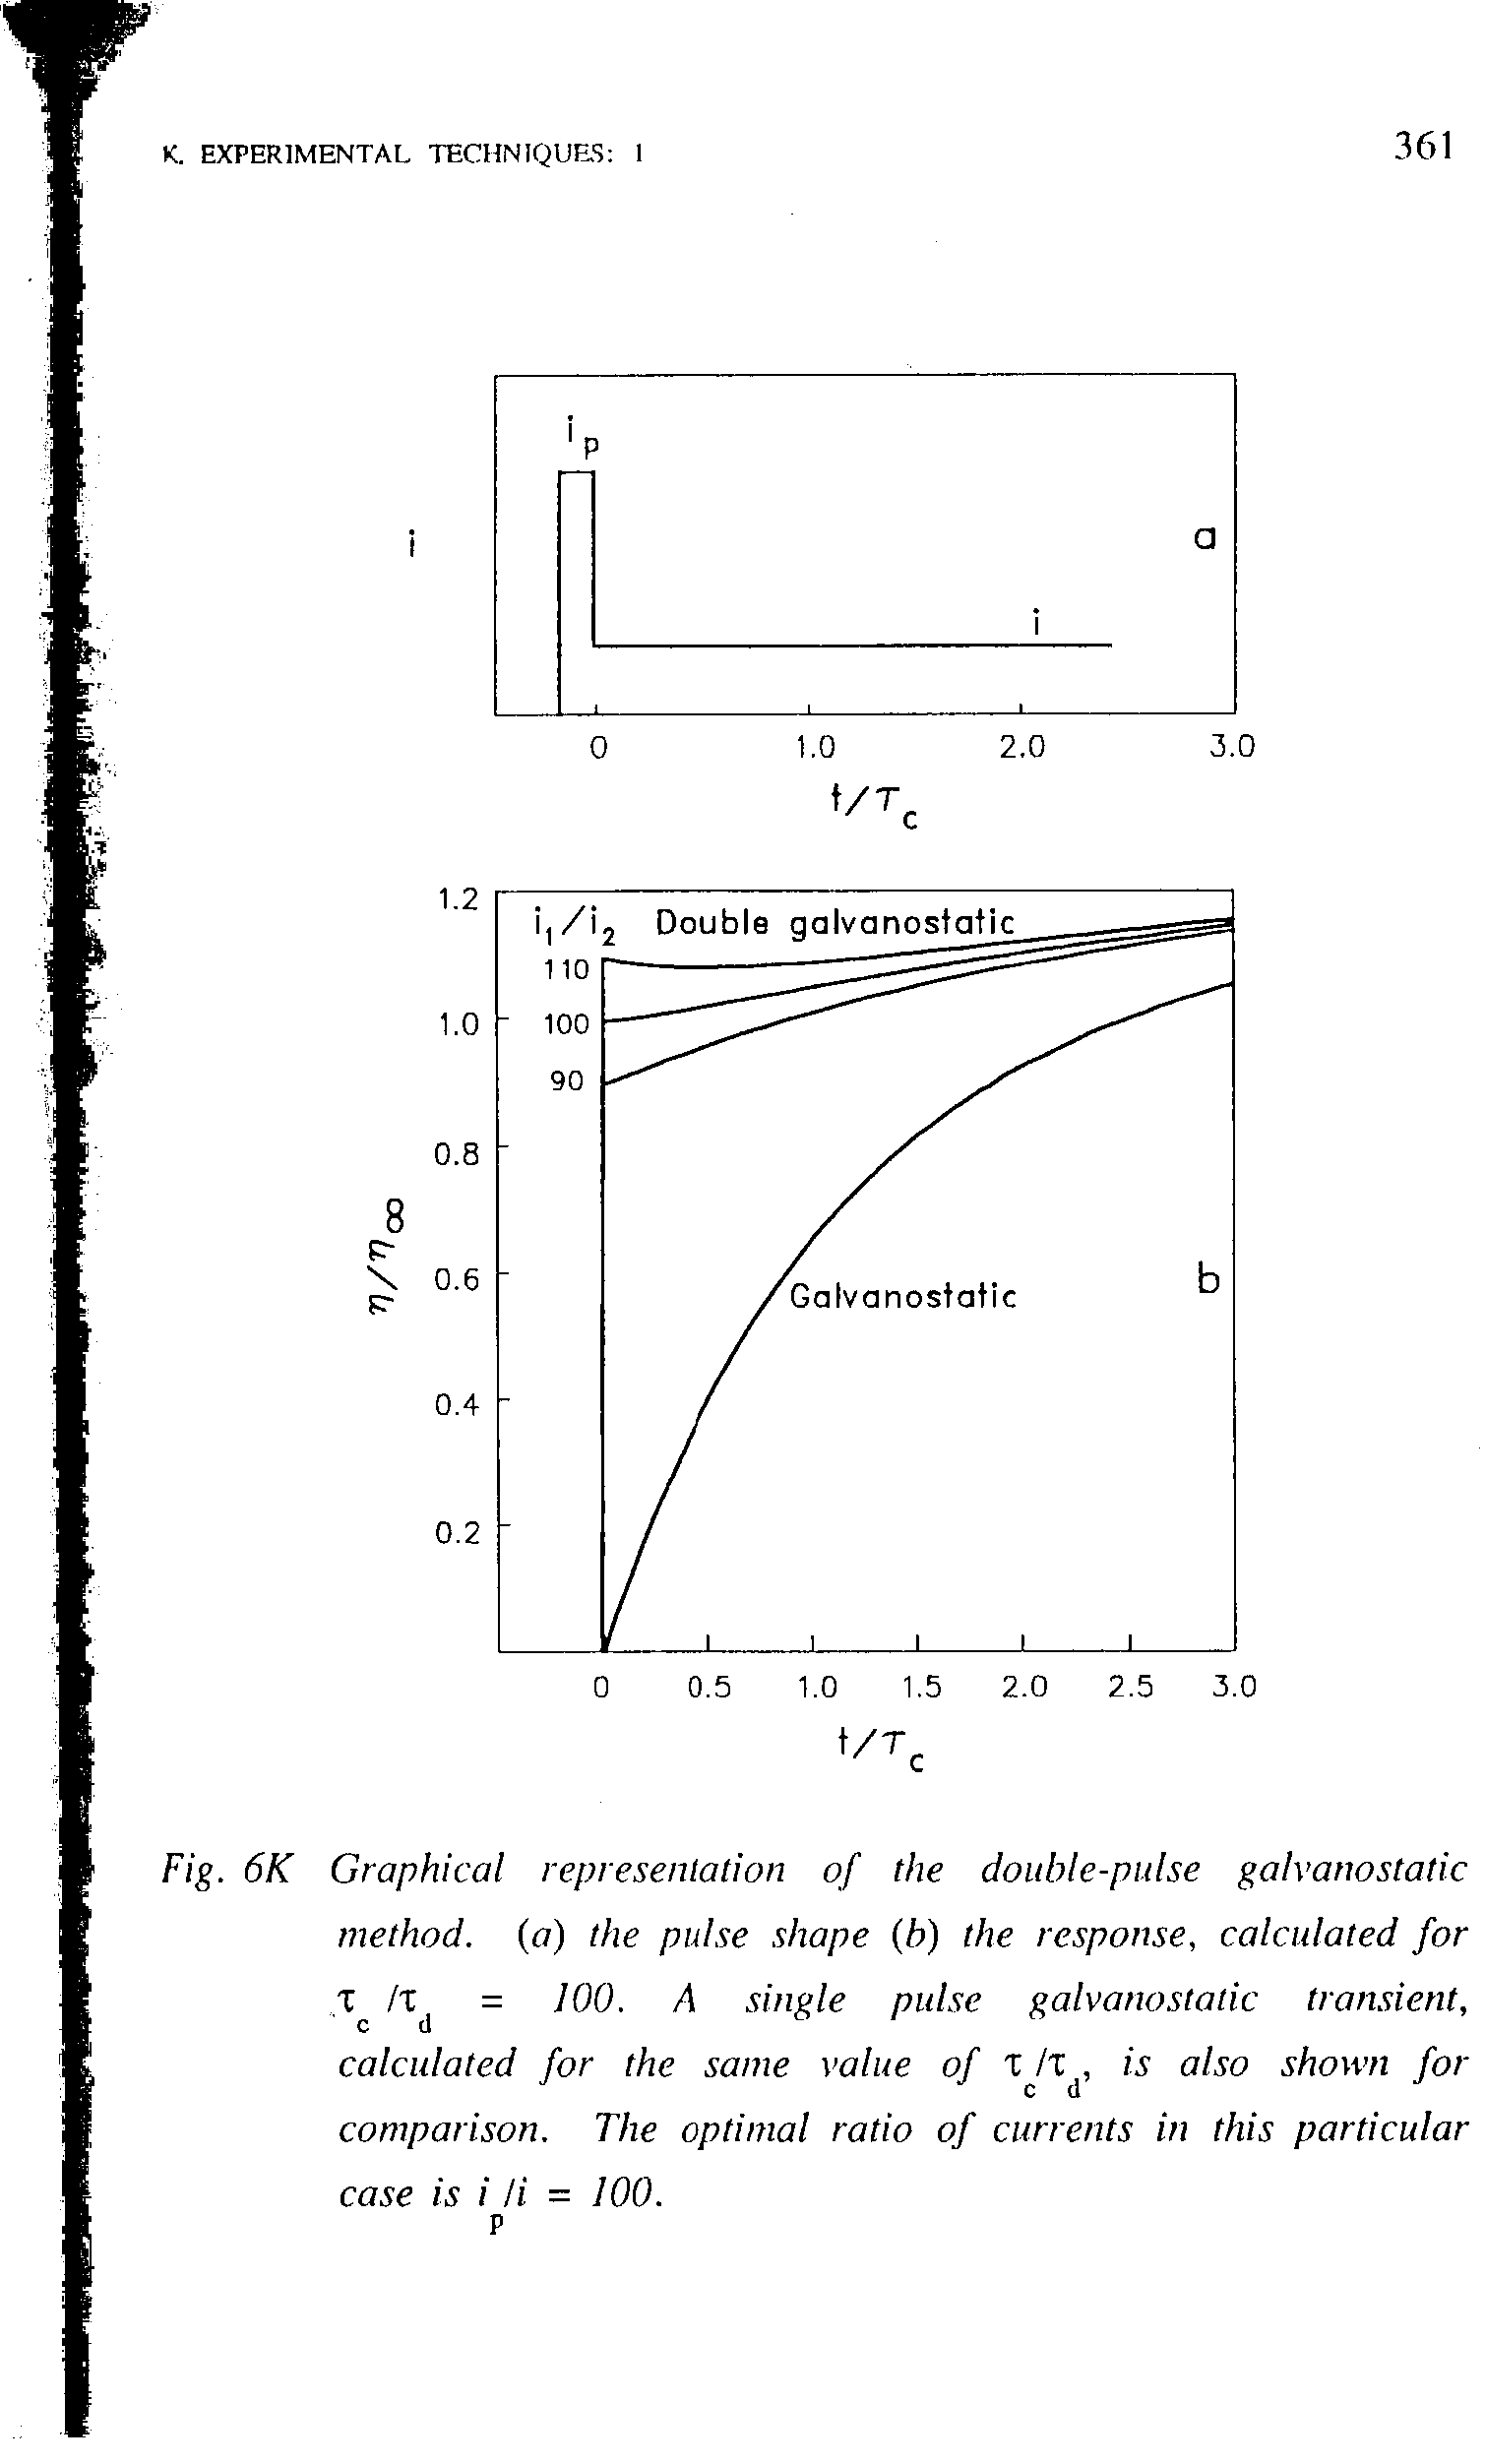 Fig. 6K Graphical representation of the double-pulse galvanostatic method, (a) the pulse shape (h) the response, calculated for, x /T = 100. A single pulse galvanostatic tran.sient,...